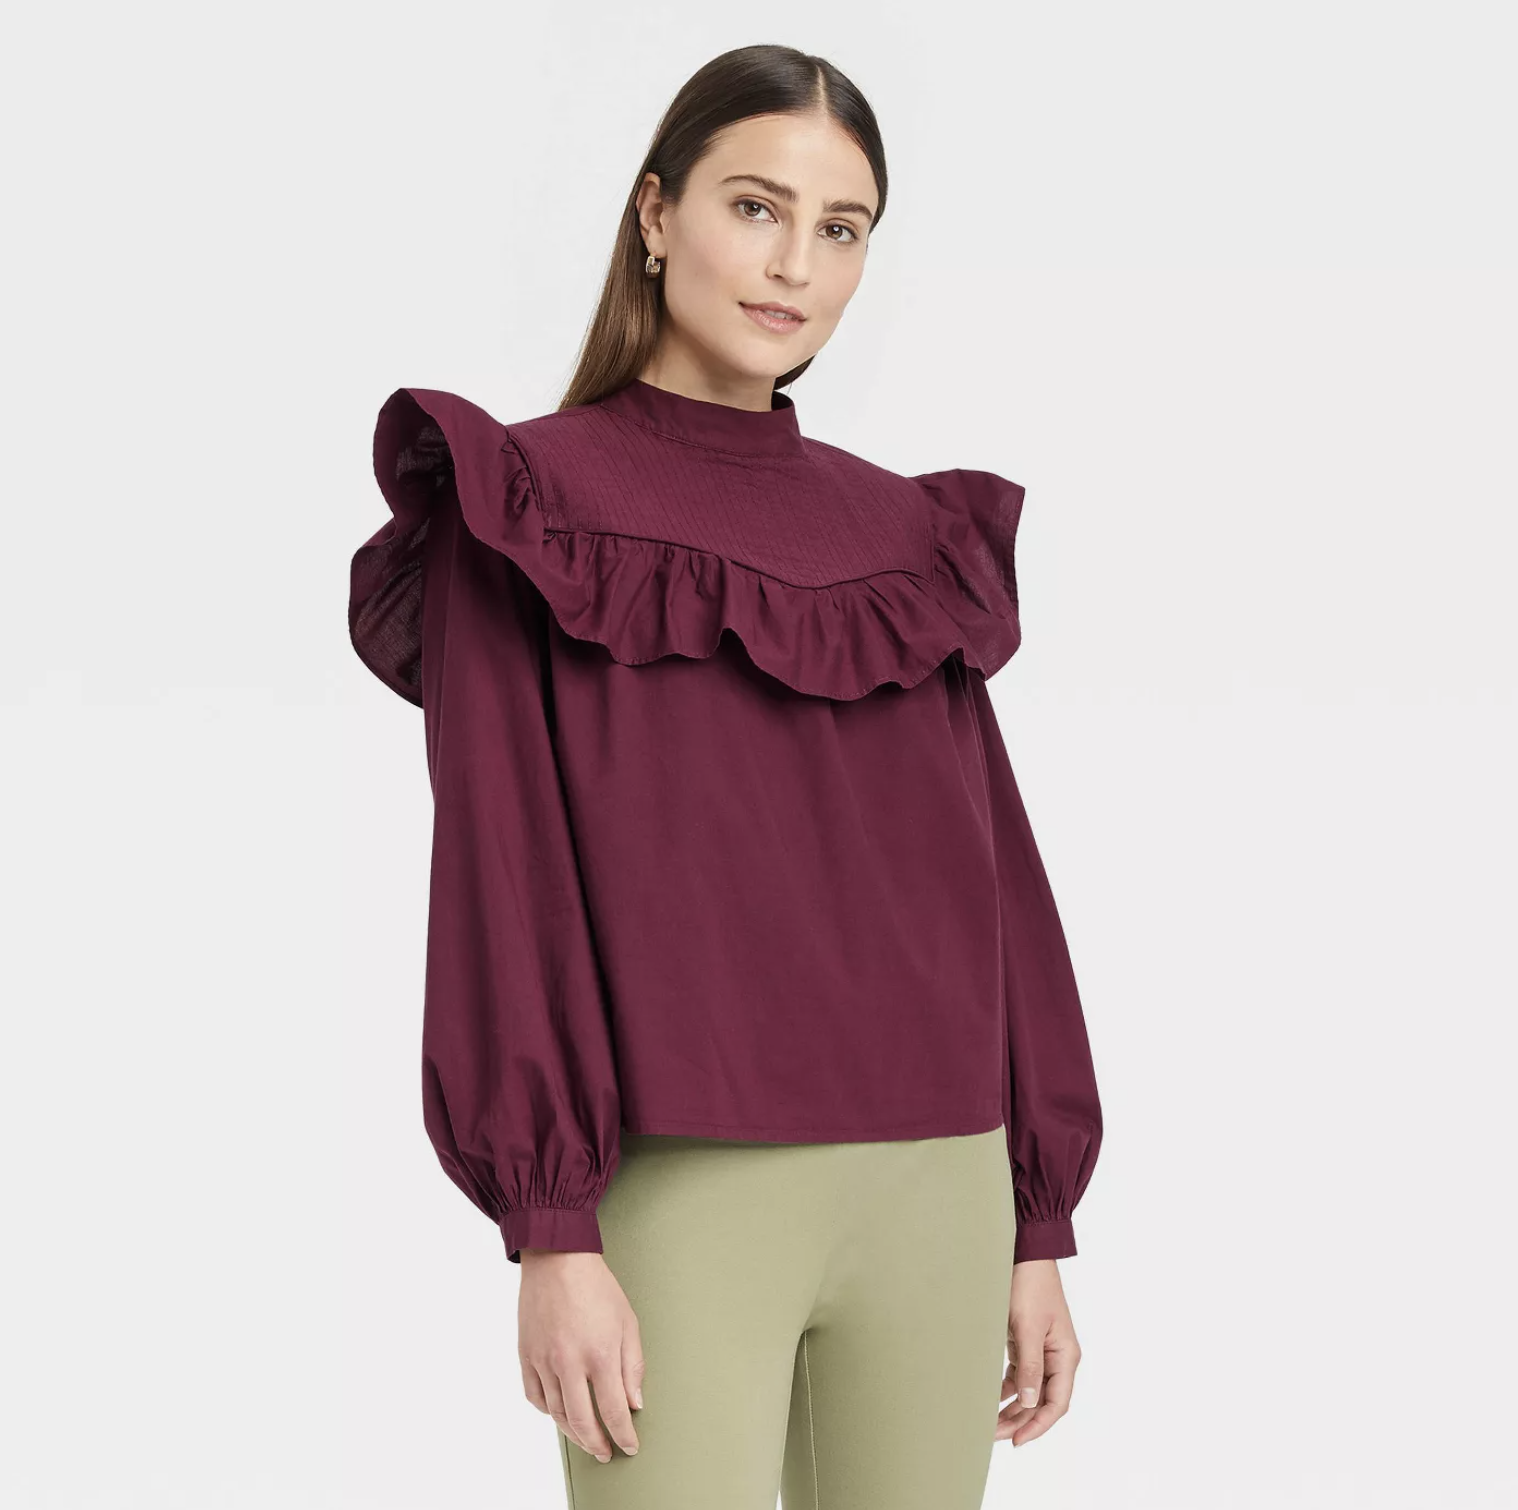 model wearing the shirt in burgundy with ruffled top edge